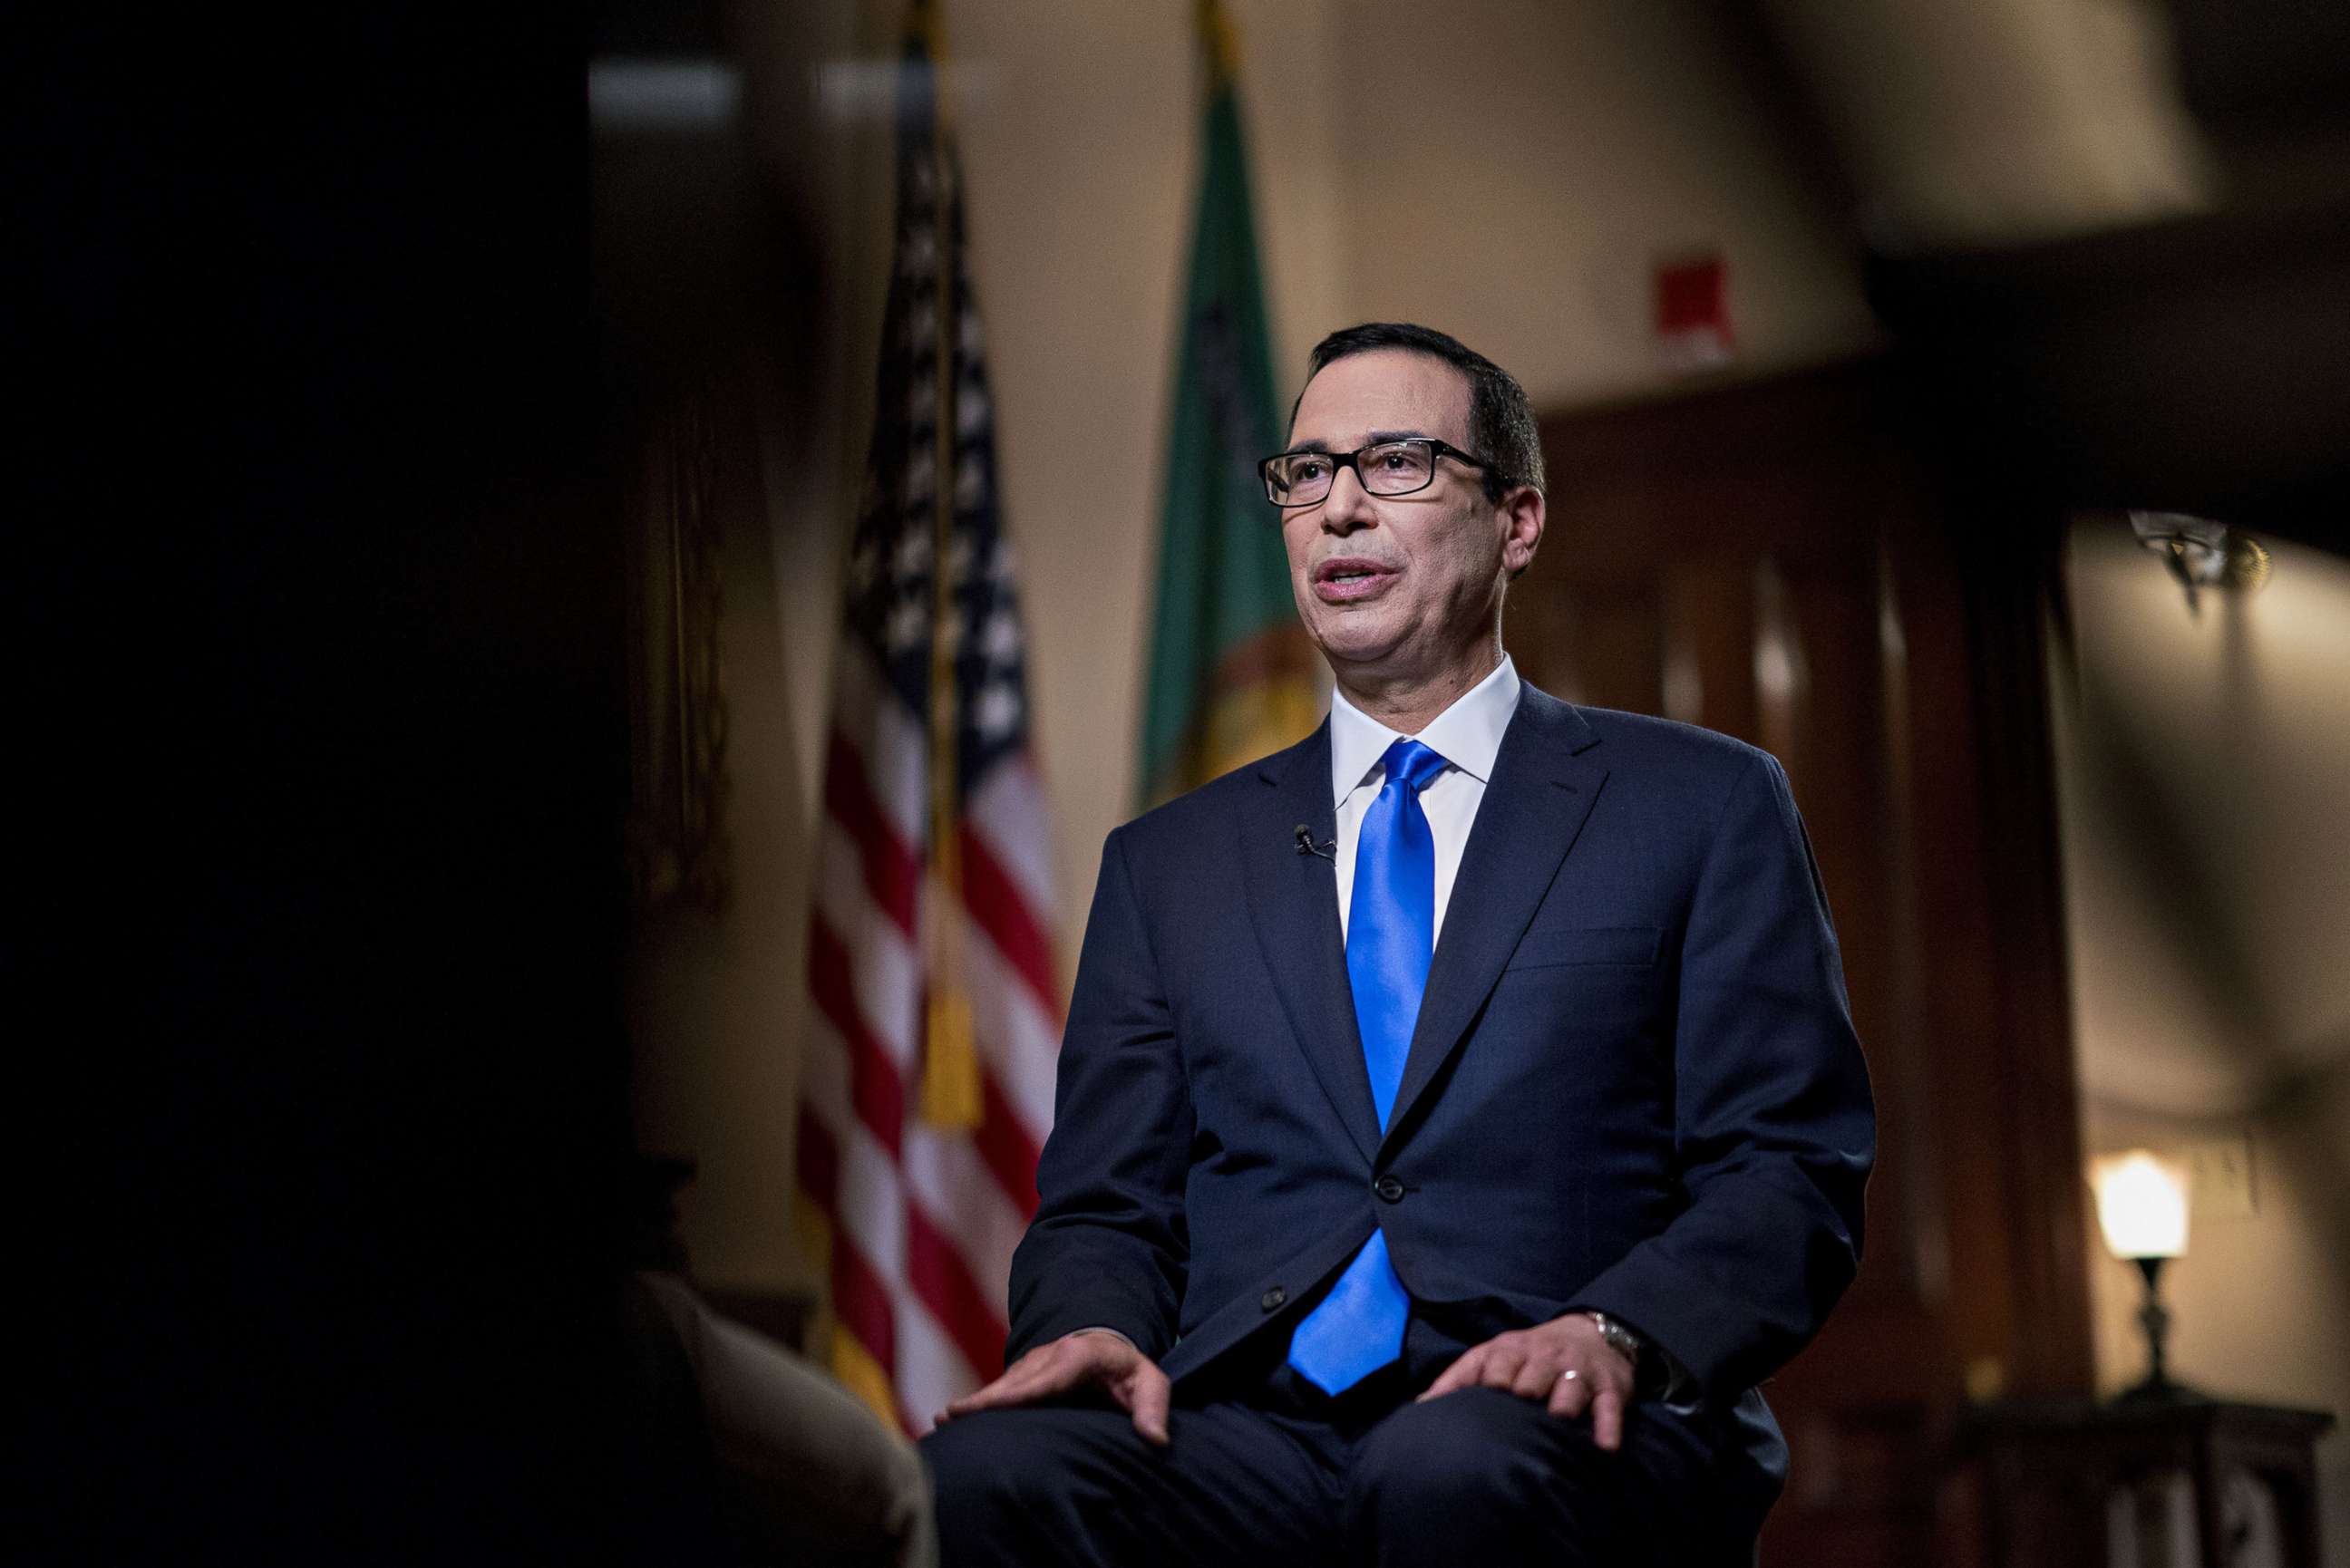 PHOTO: Steven Mnuchin, Treasury secretary, speaks during a Bloomberg Television interview in Washington, D.C., March 7, 2018.